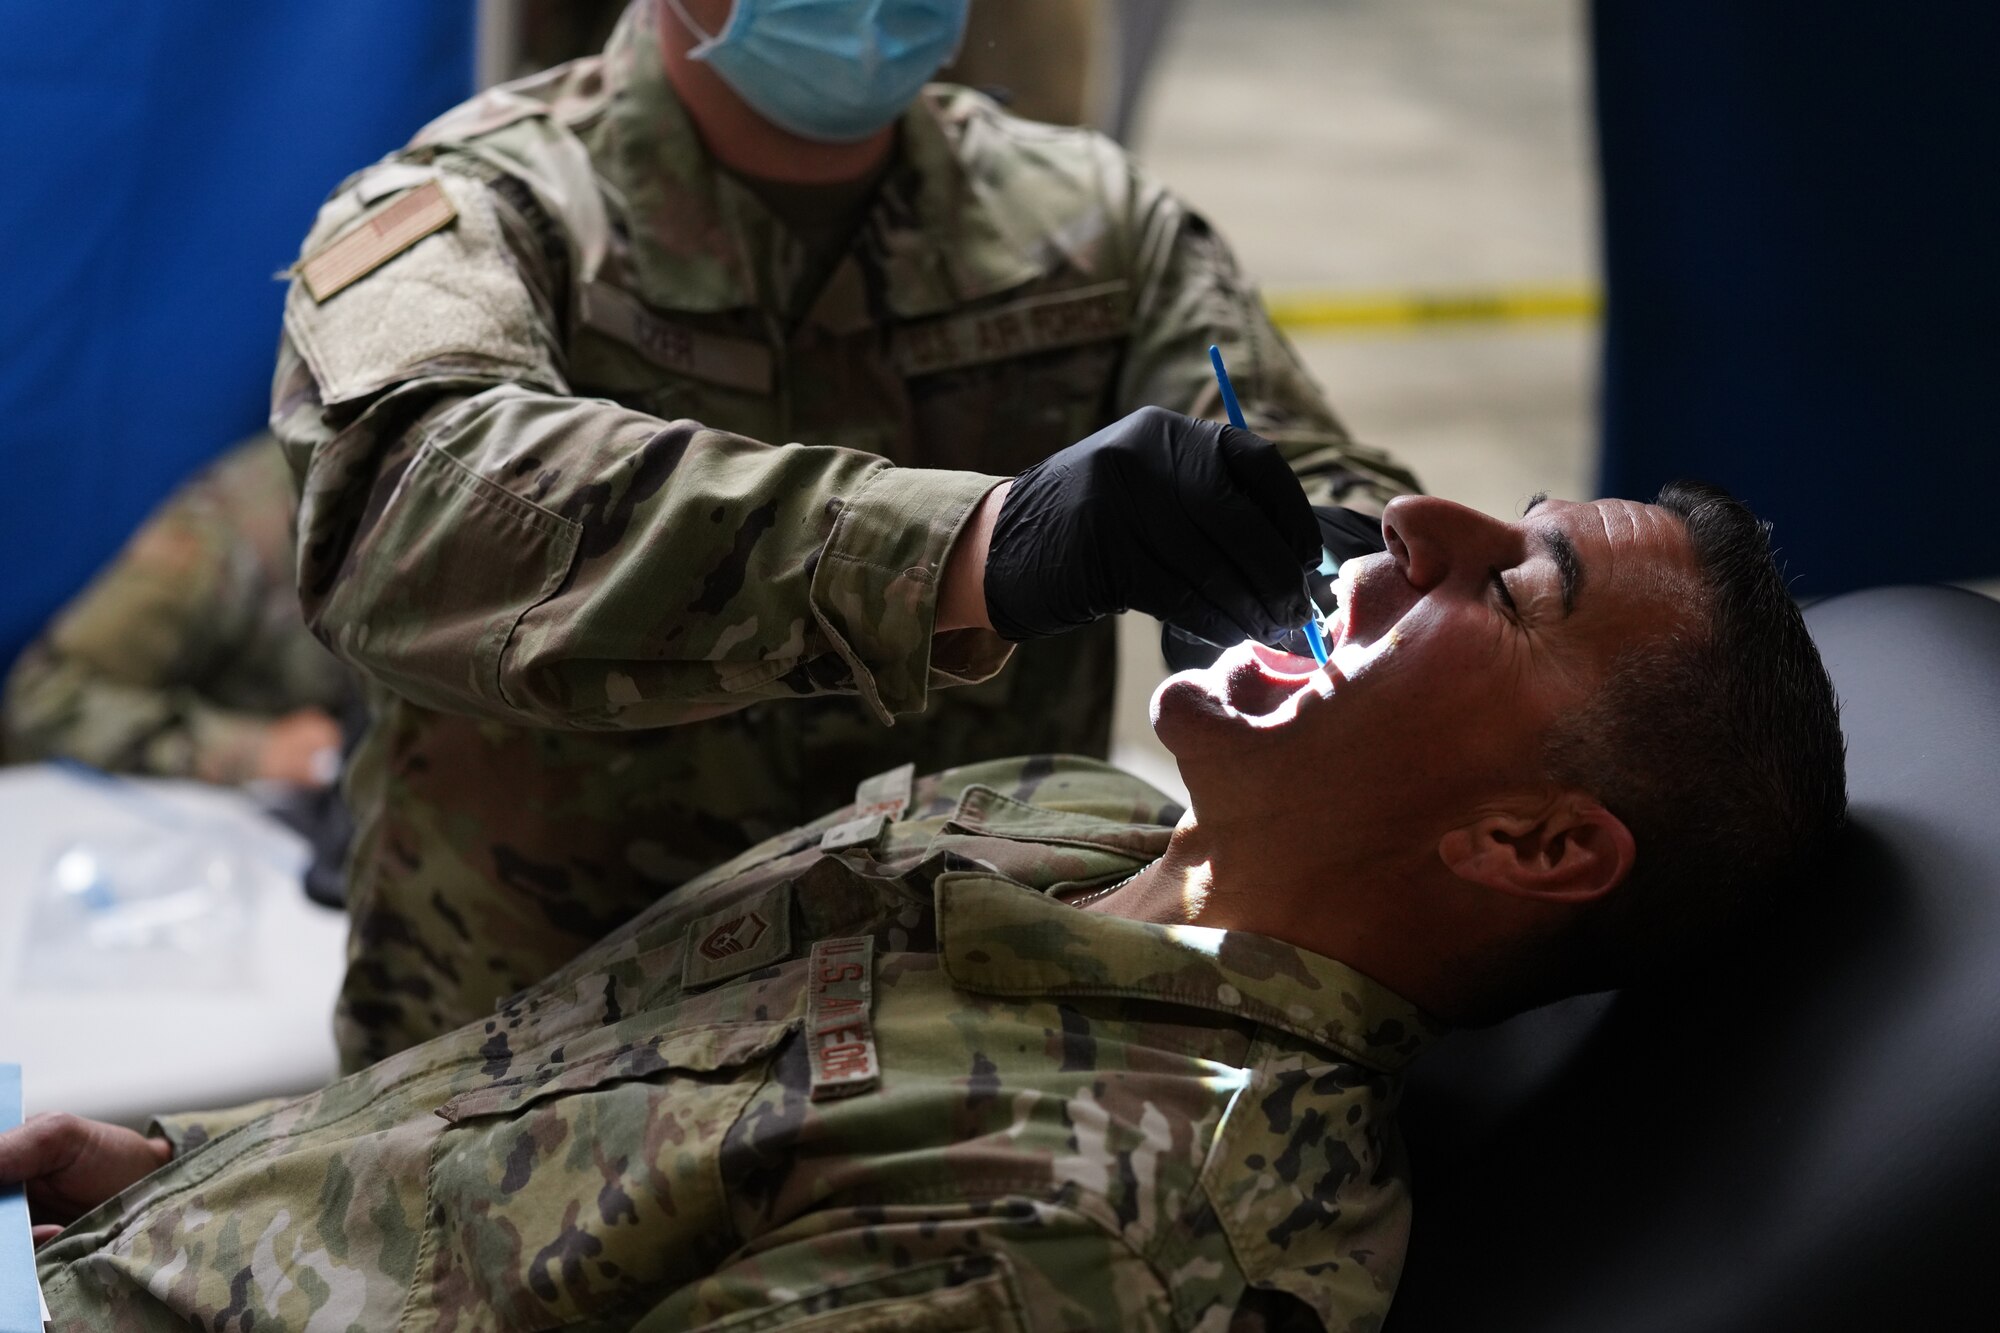 California Air National Guard Master Sgt. Tony Perez of the 146th Security Forces Squadron has his teeth examined by Maj. Luke Czer, a dentist with the 146th Medical Group, at the PHAG2R (Periodic Health Assessment Go 2 Ready) at Channel Islands Air National Guard Station (CIANGS), Port Hueneme, California. November 6, 2021. This two-day event is the first annual PHAG2R for CIANGS. It's objective is to increase efficiency for airmen to complete their medical requirements, maintaining readiness for the whole year in a one-stop shop.